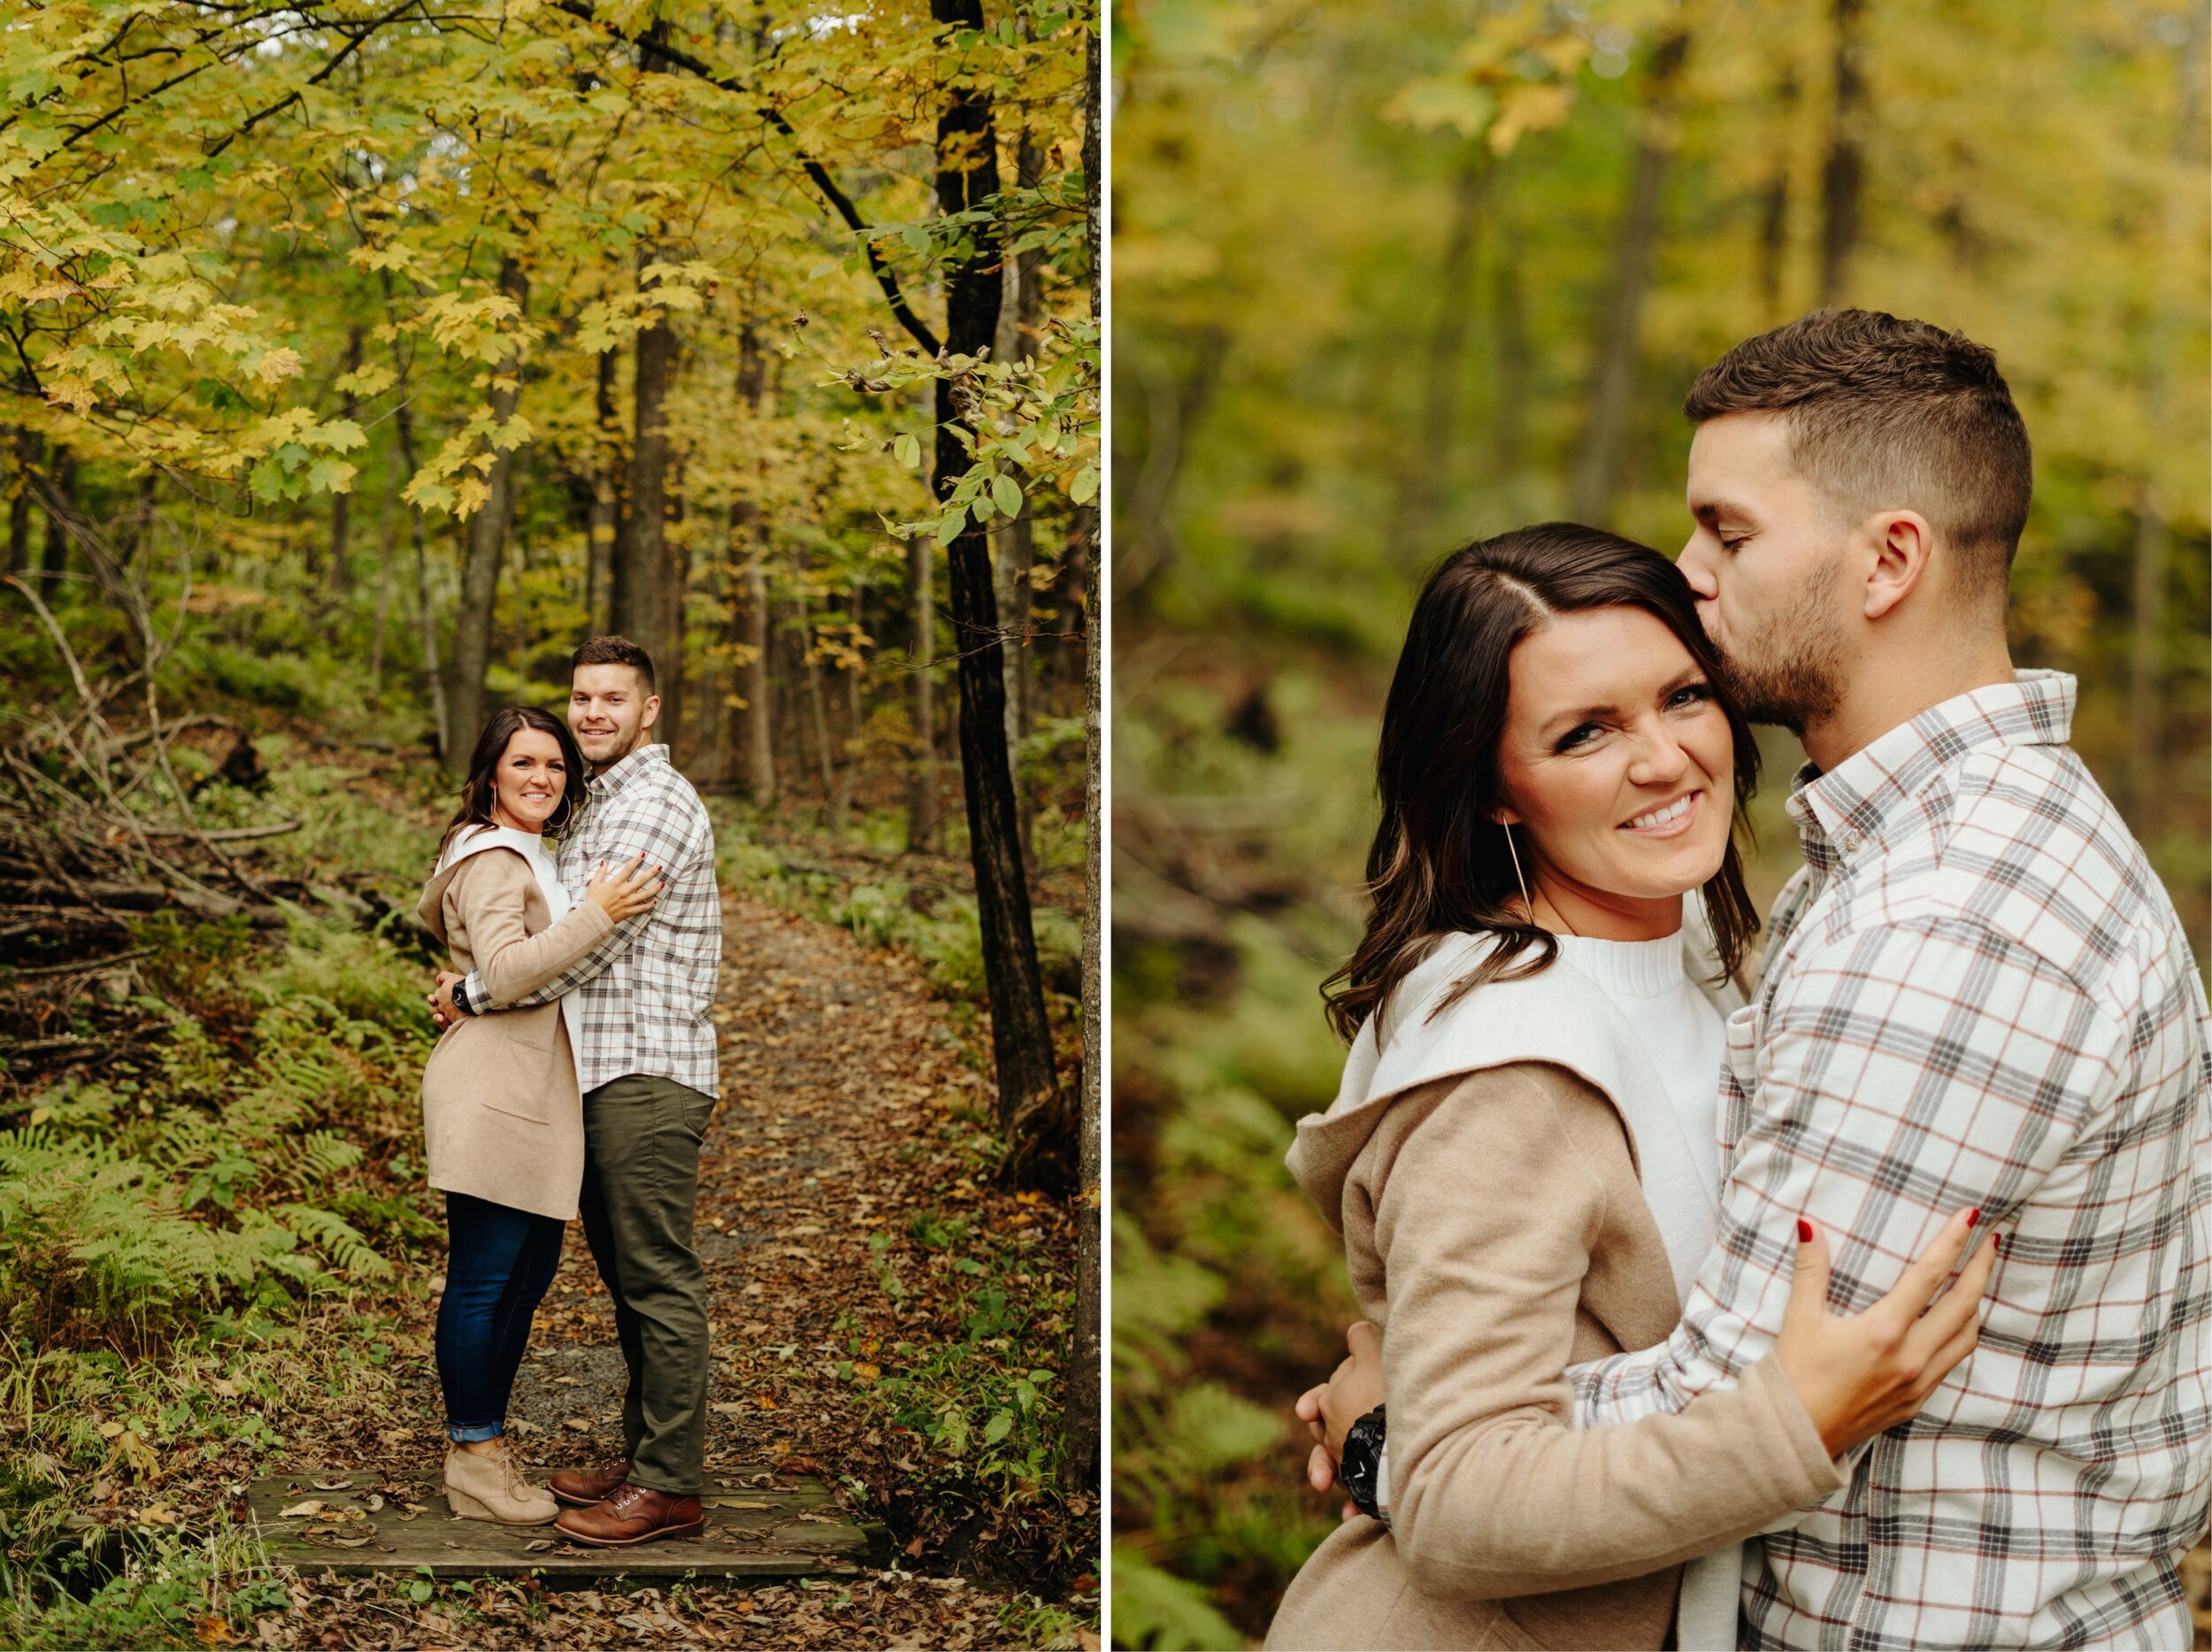 13_taylors-falls-engagement-session-interstate-park-mckenzie-josh-26_taylors-falls-engagement-session-interstate-park-mckenzie-josh-24.jpg